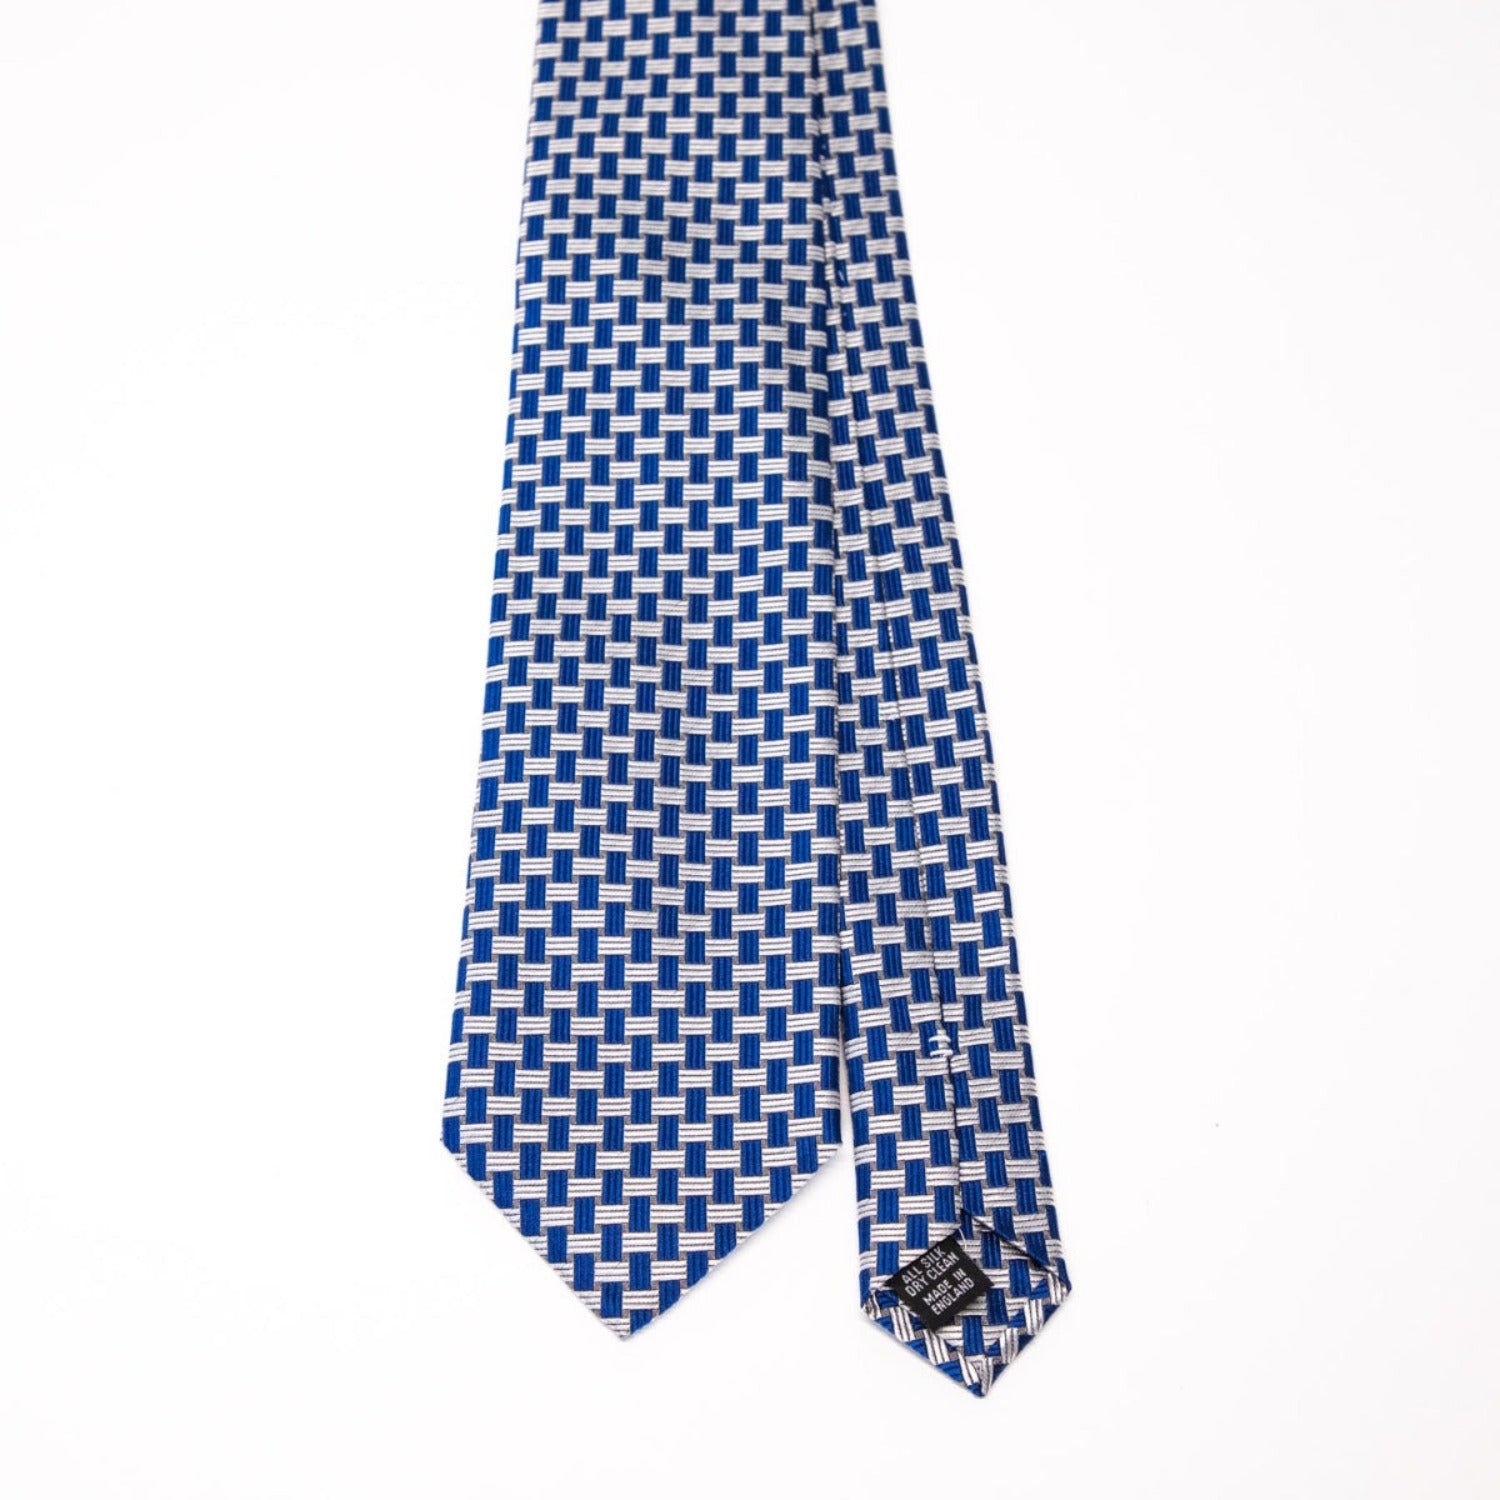 A Sovereign Grade Blue Basket Weave Silk Tie by KirbyAllison.com on a white background.